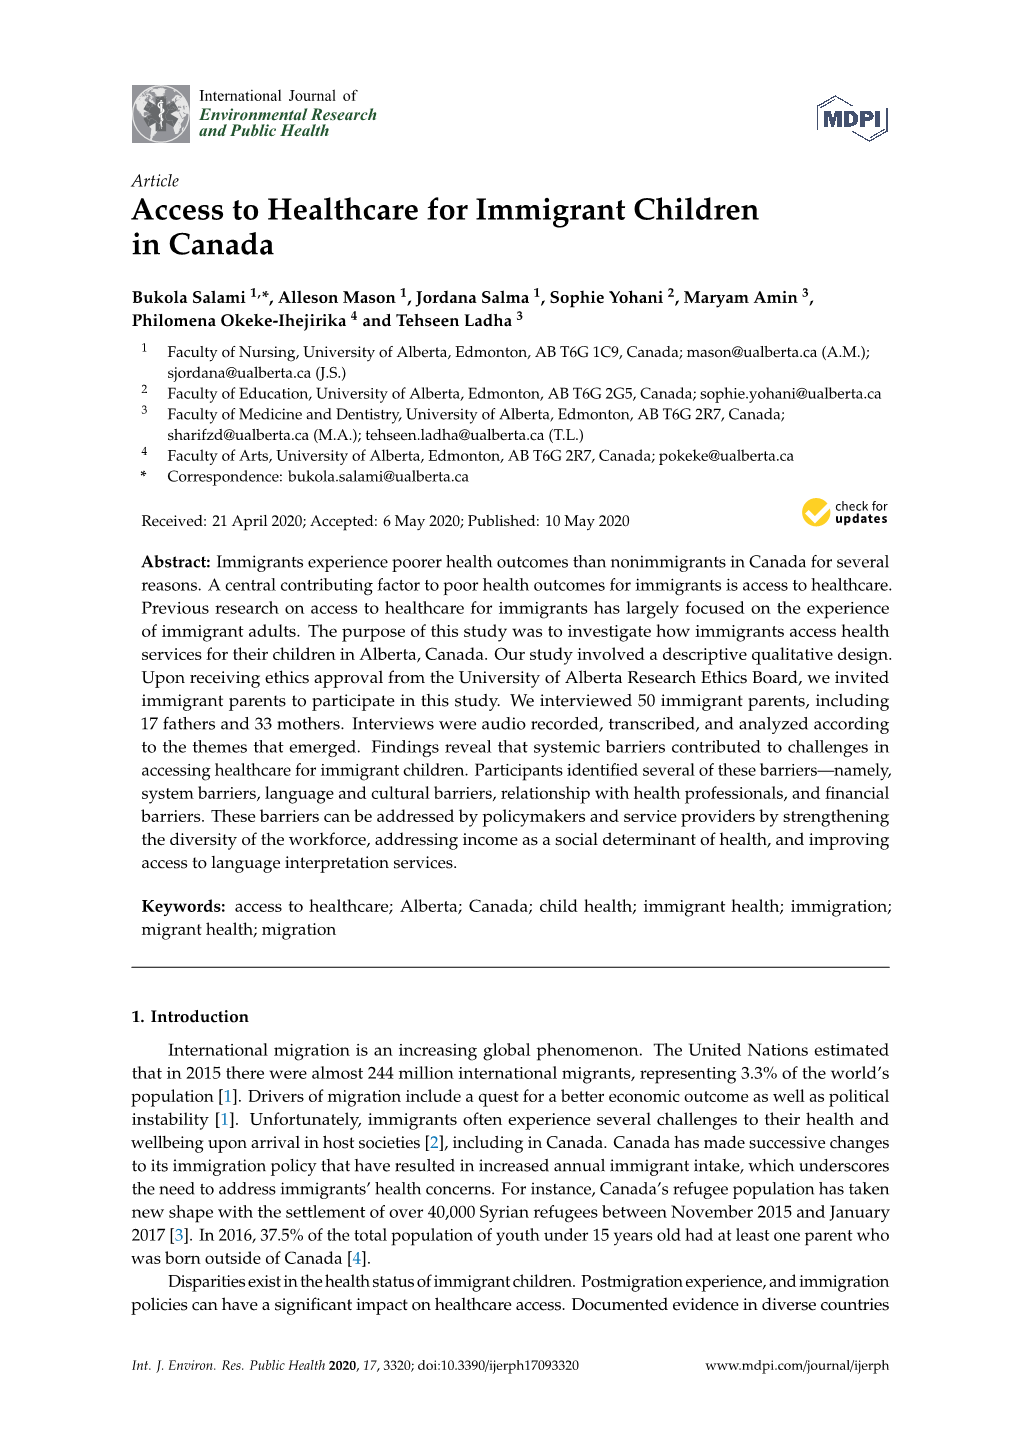 Access to Healthcare for Immigrant Children in Canada